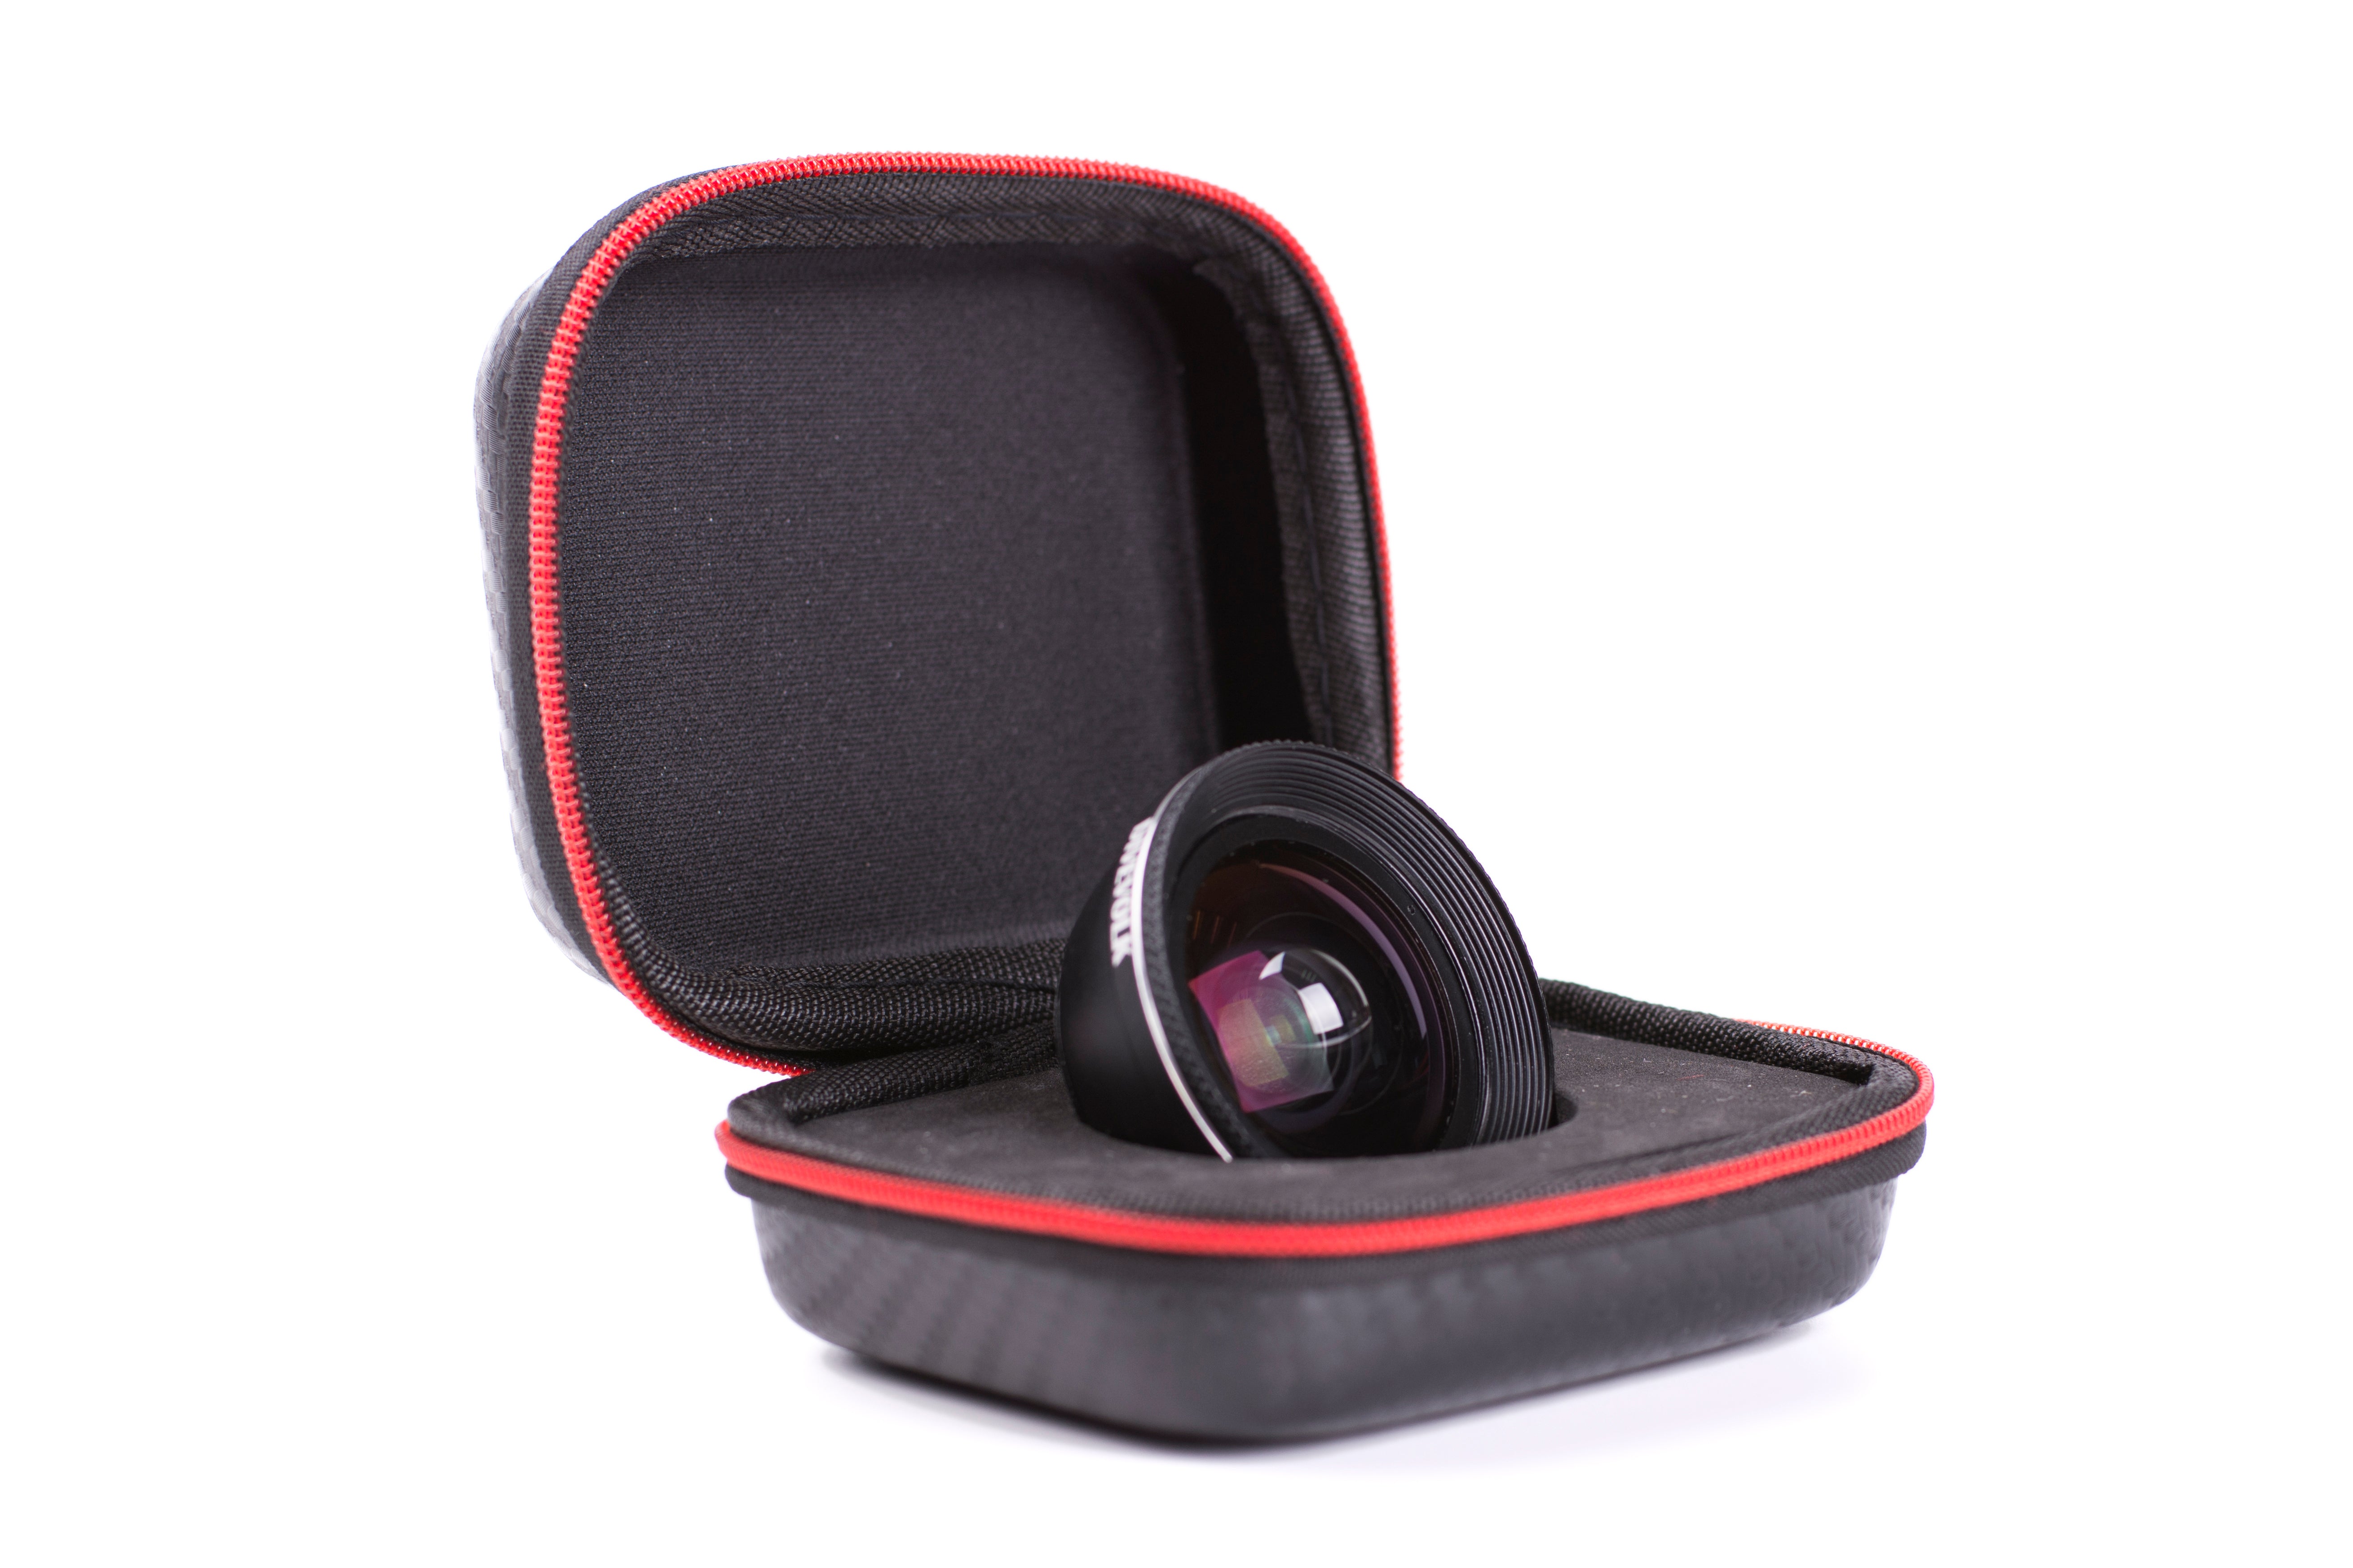 Divevolk Seatouch 3 Pro Wide Angle Wet Lens 105 Degree